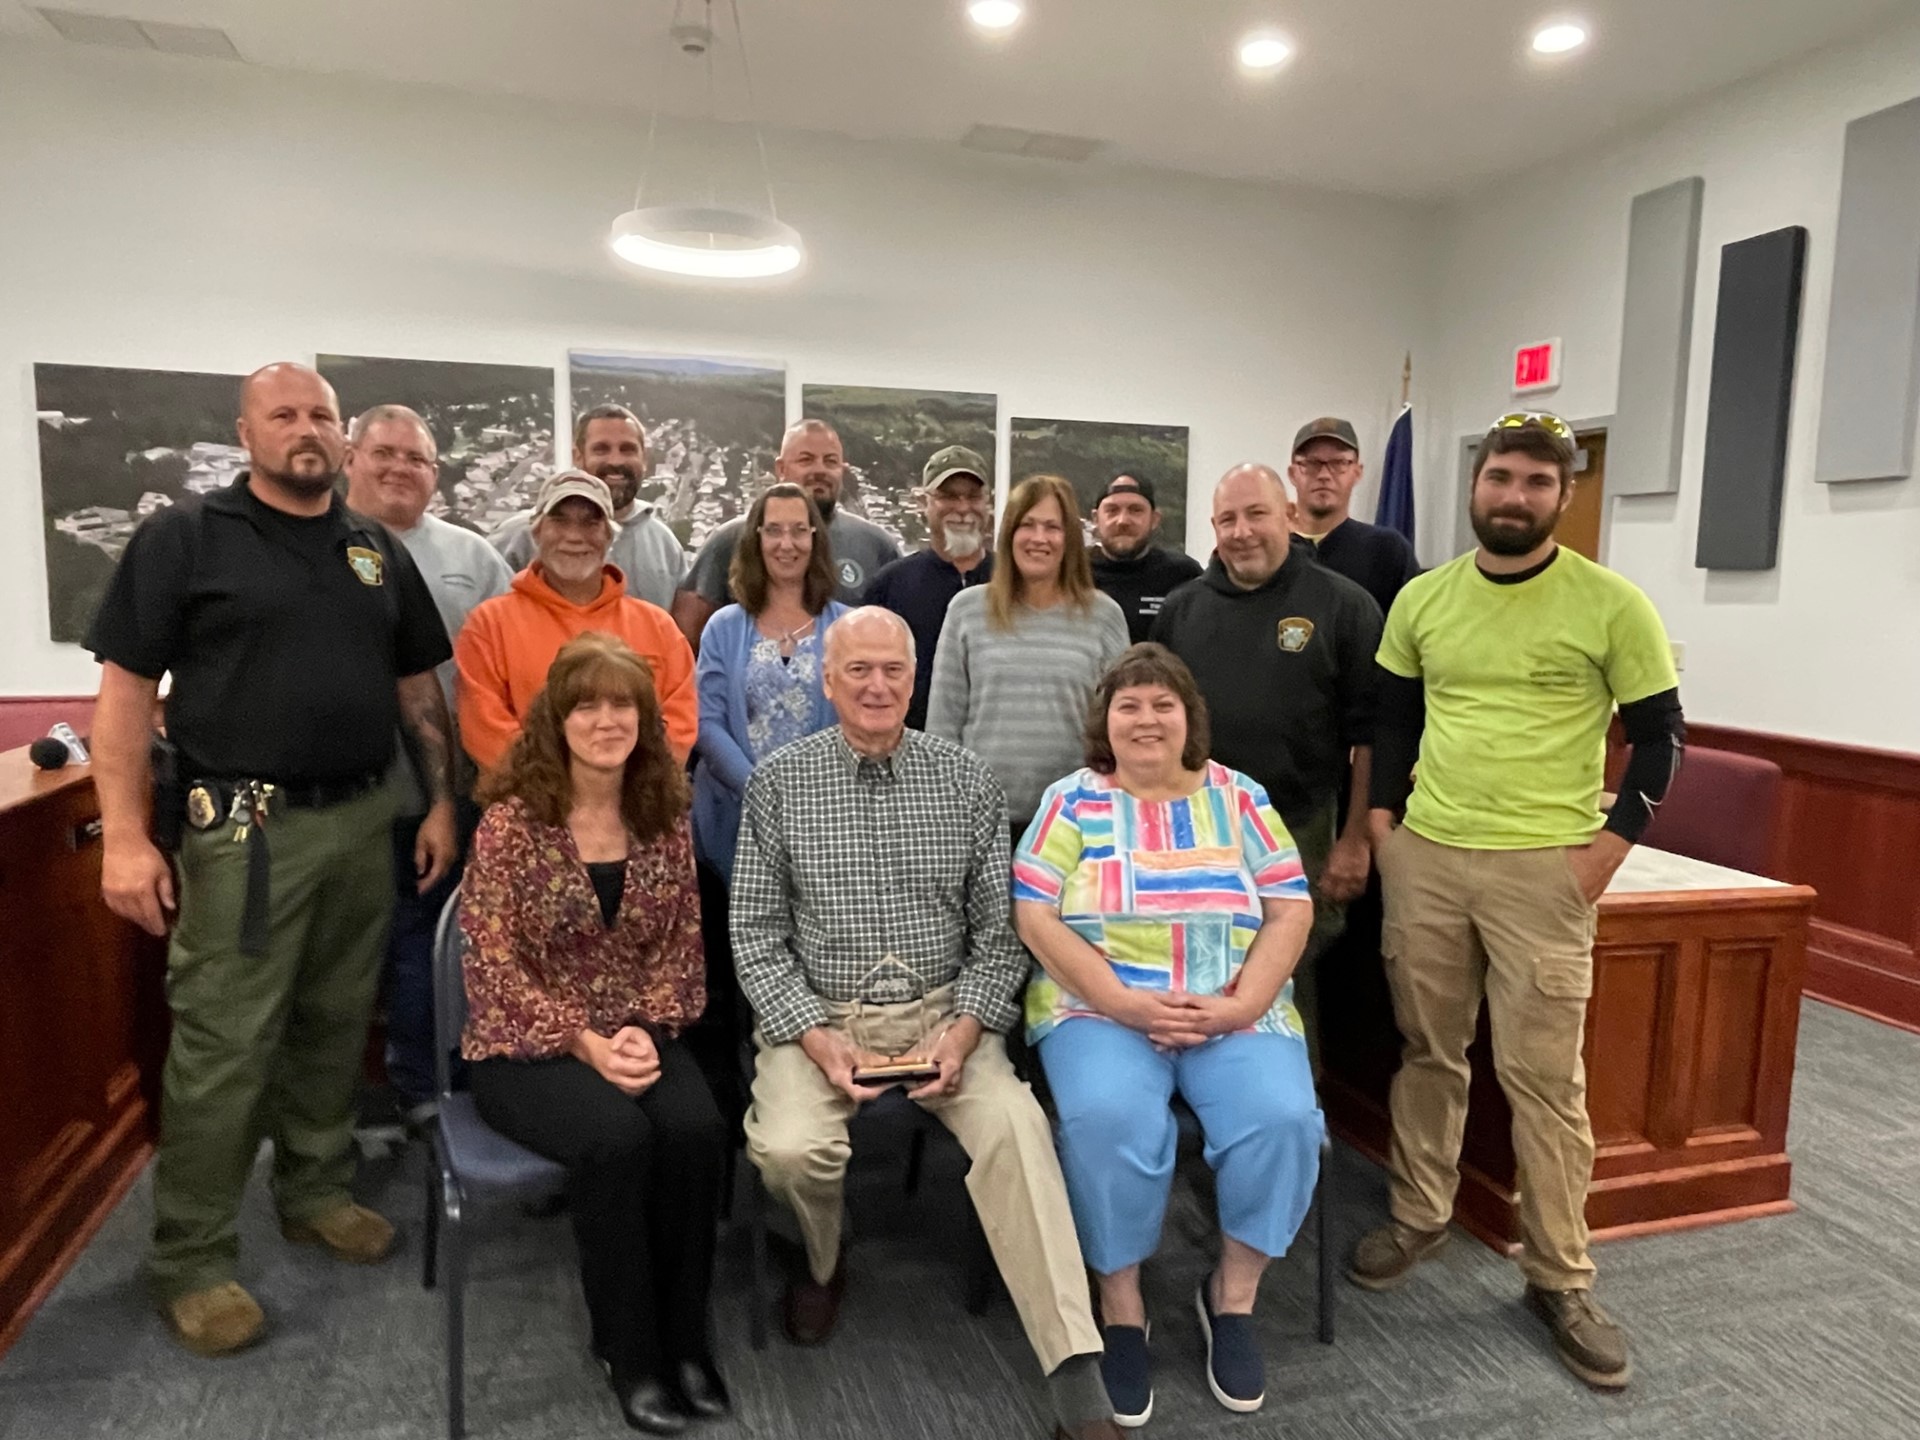 Harold Pudliner accepts the 2023 AMP Seven Hats Award during a surprise ceremony with borough staff members. He was informed of his selection for the award by Jeff Brediger, Orrville Director of Utilities and former Chair of the AMP Board of Trustees.